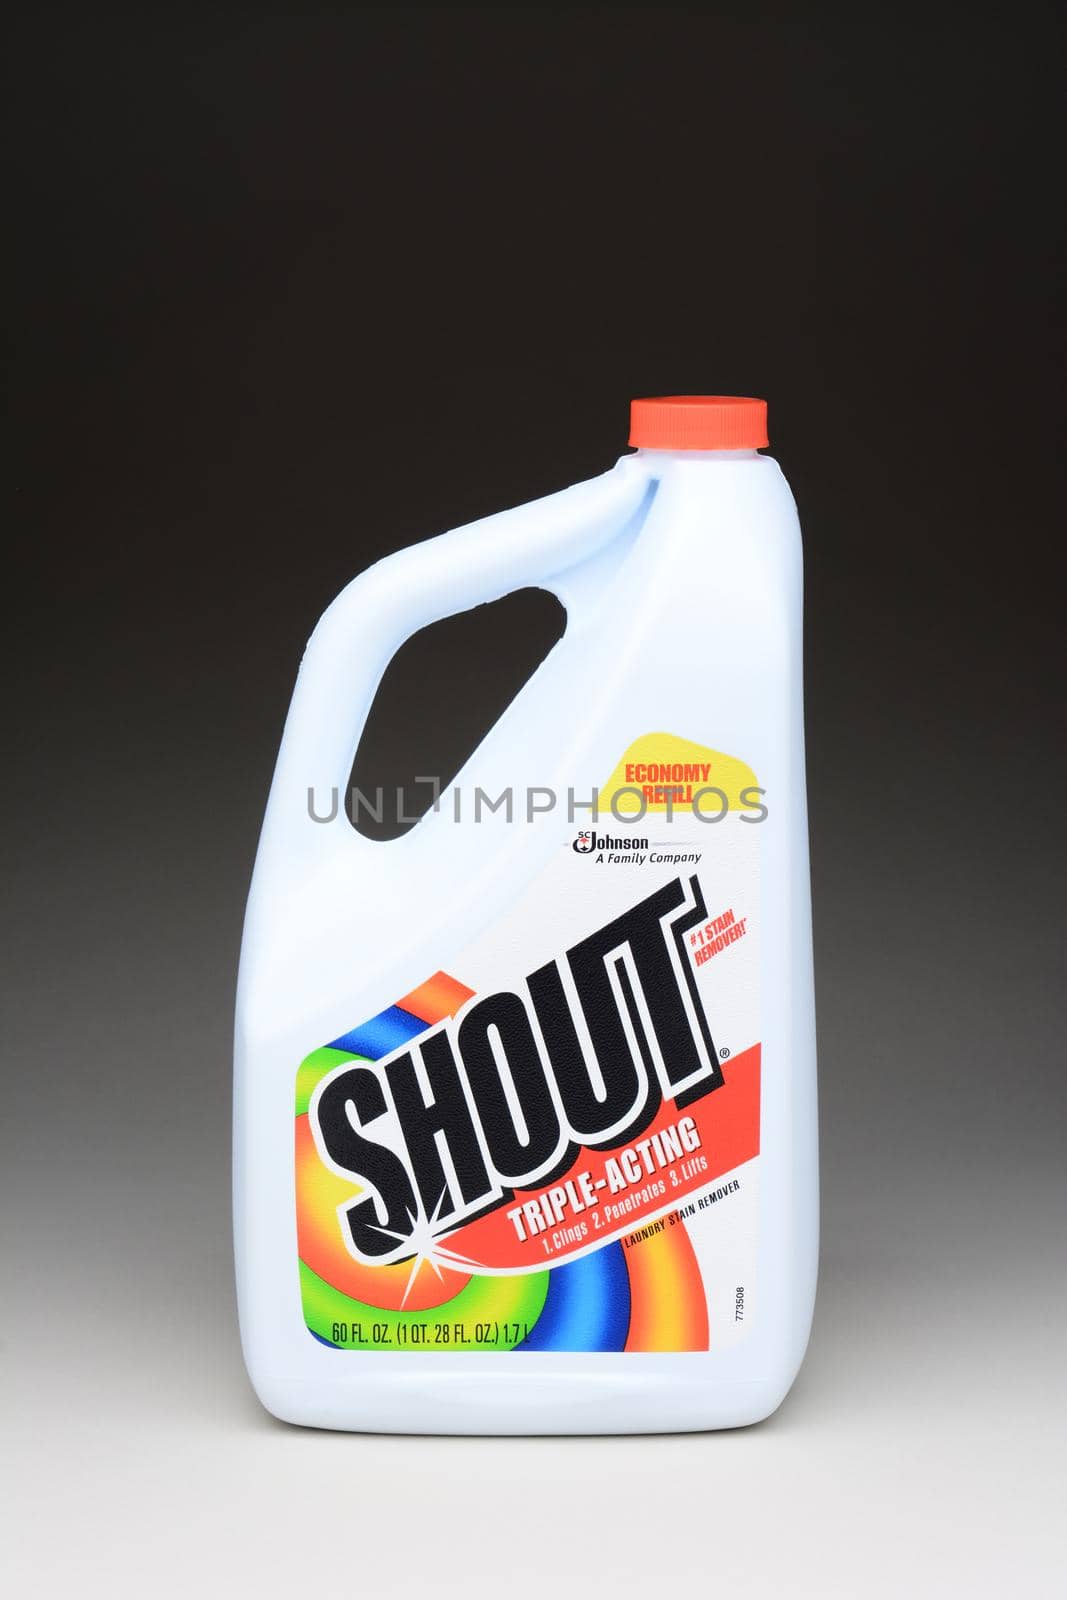 Shout Laundry Stain Remover by sCukrov